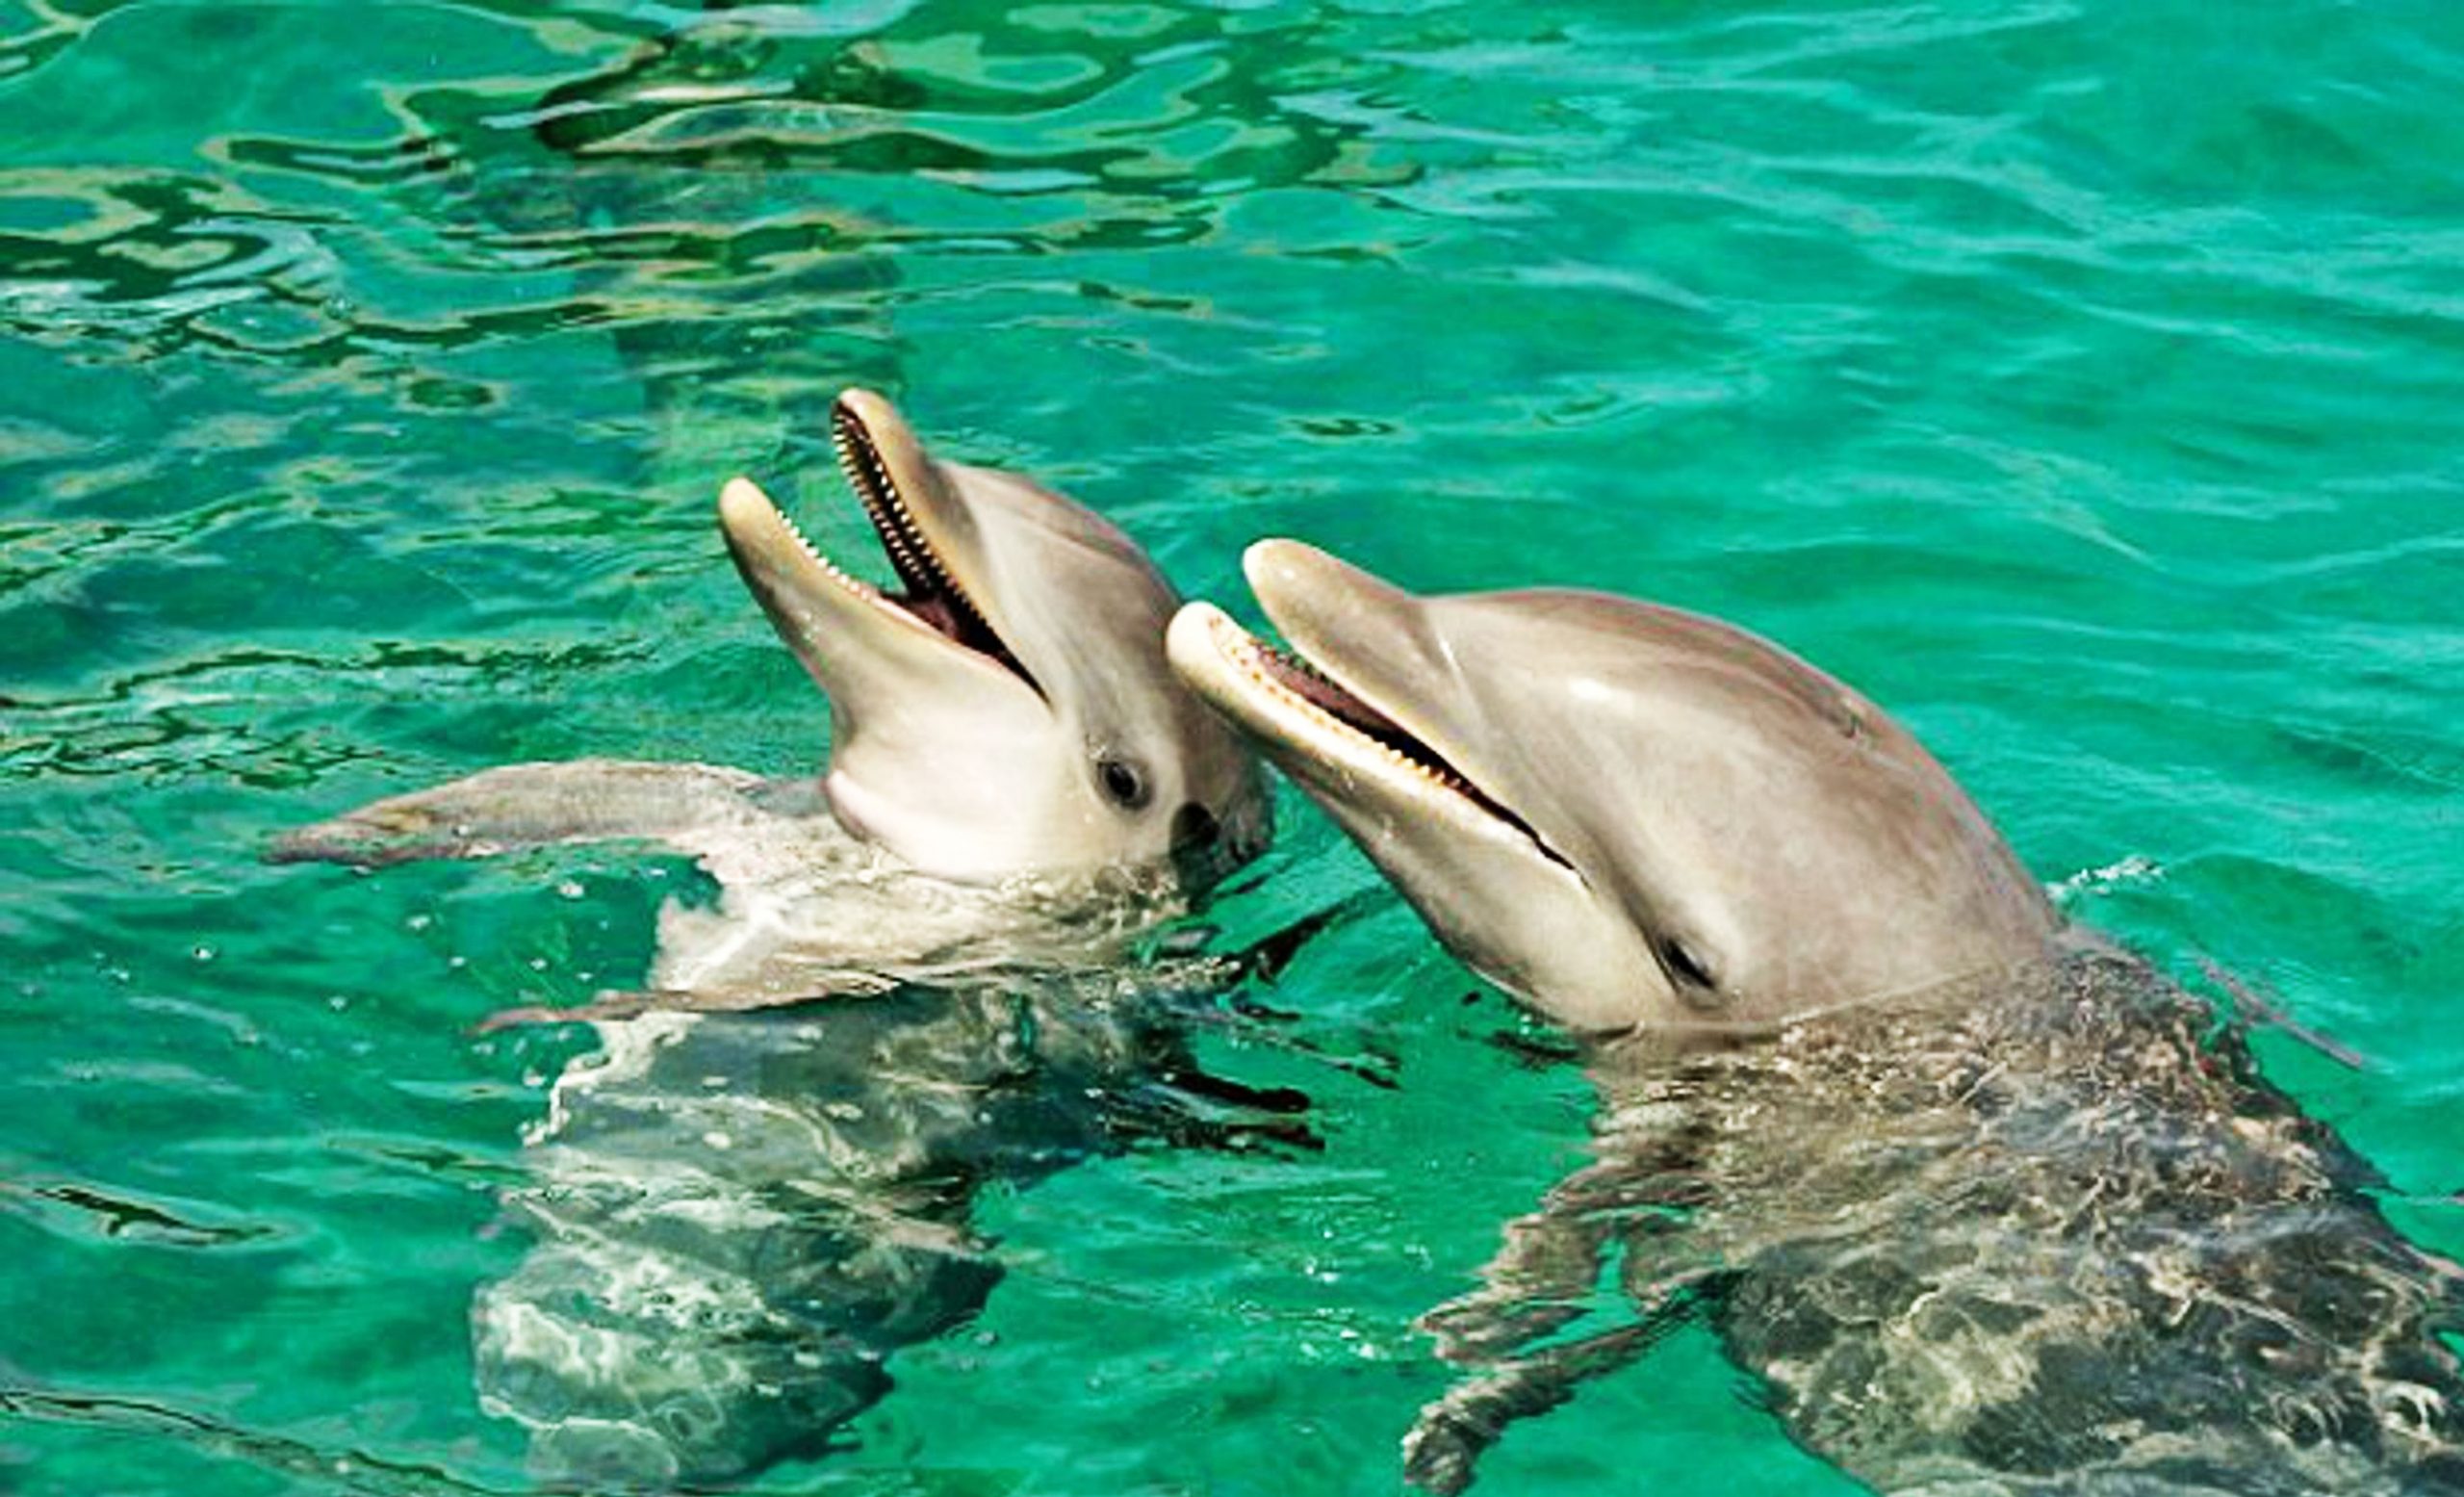 Wild Dolphins Call Each Other by Name